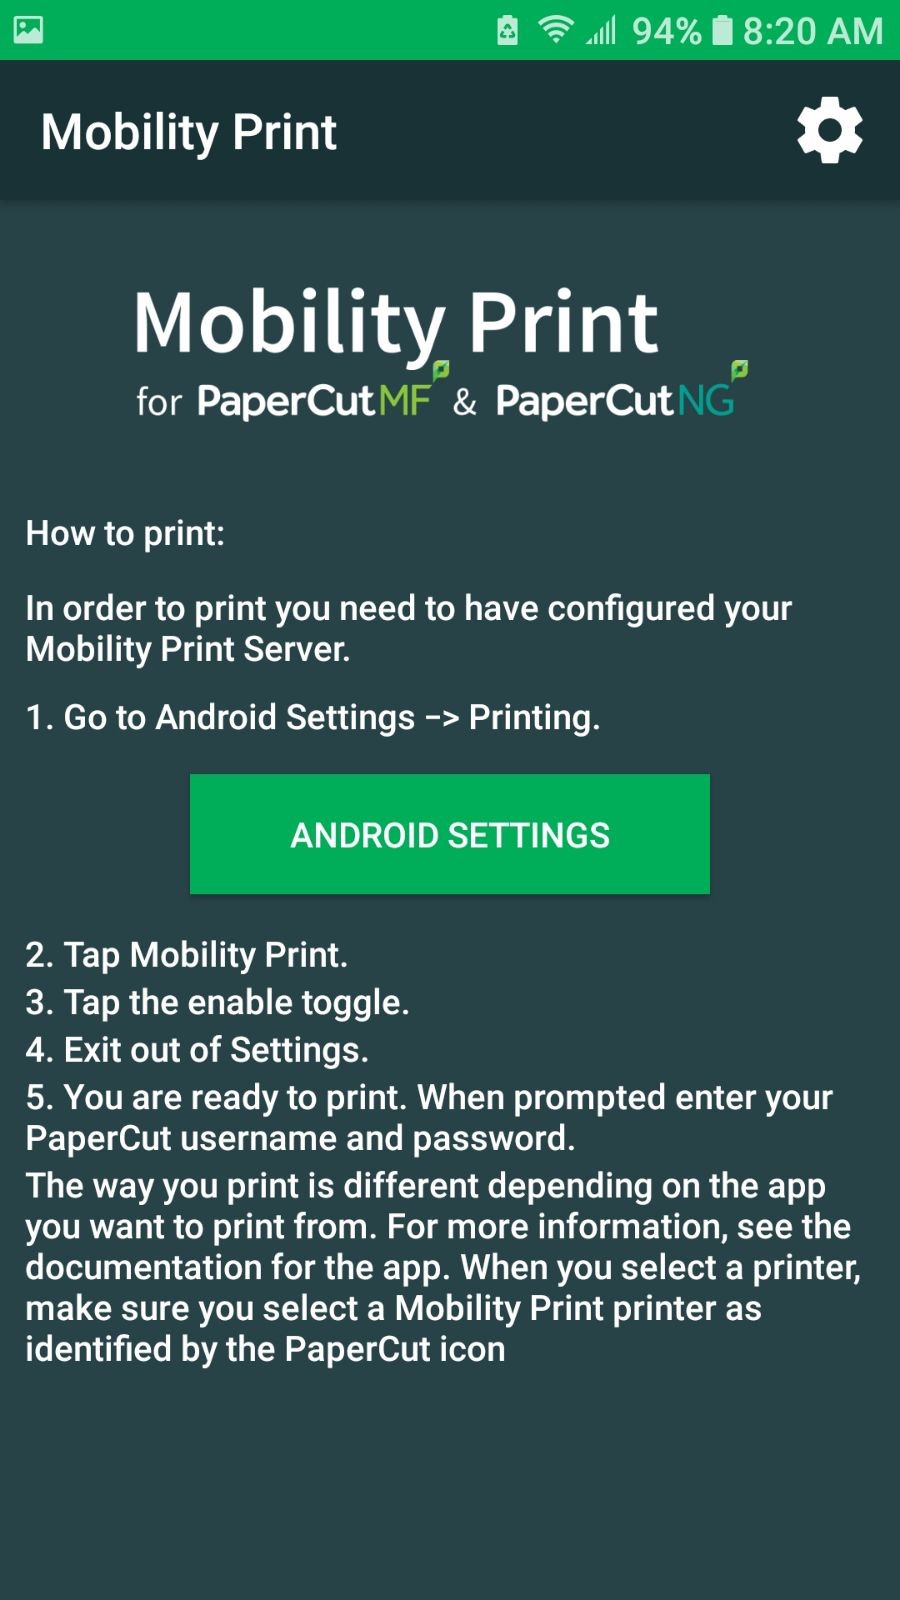 Mobility_Print_Android_Settings.jpg